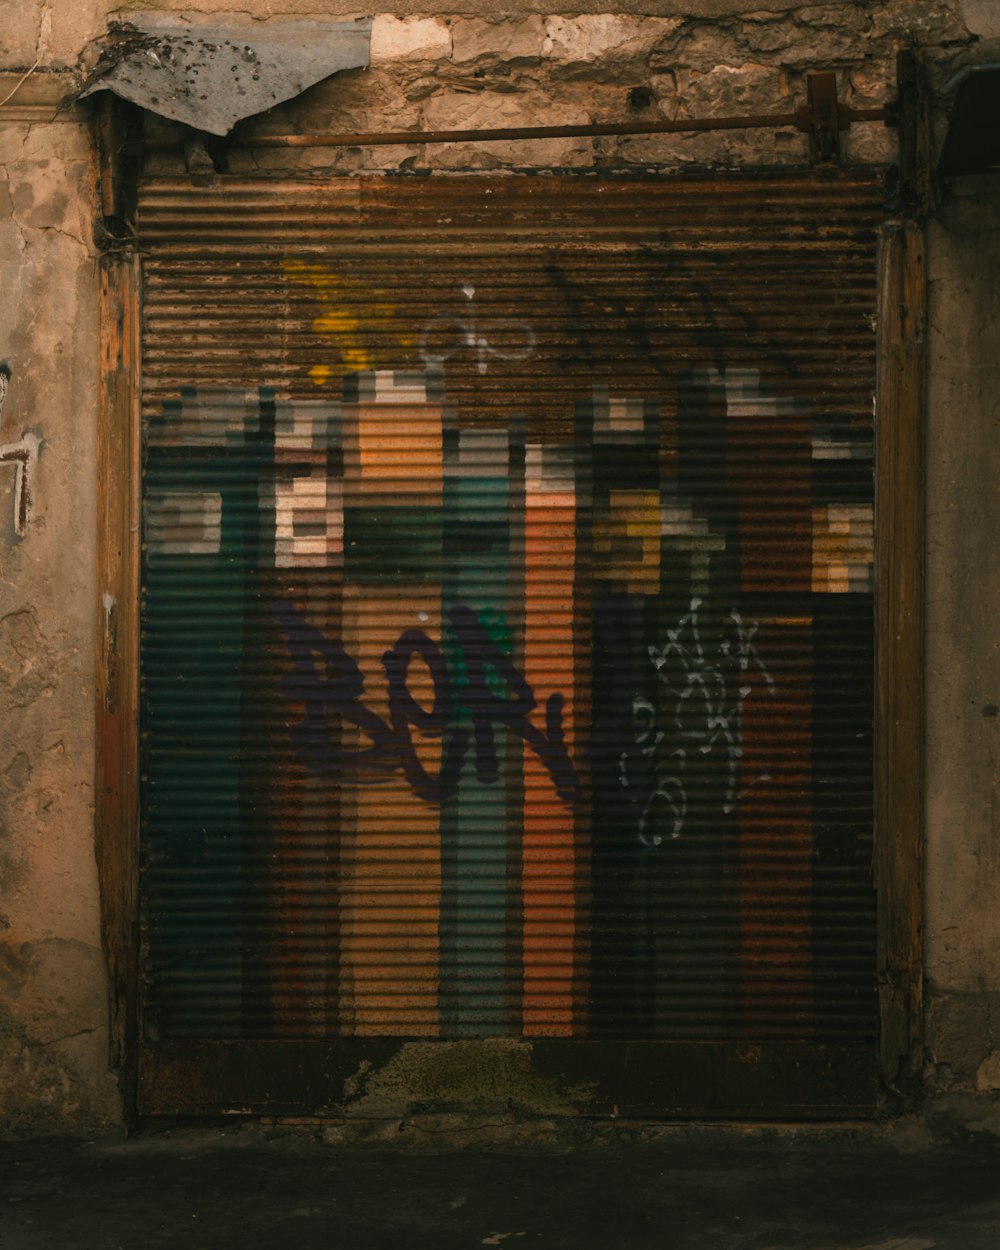 a closed garage door with graffiti on it